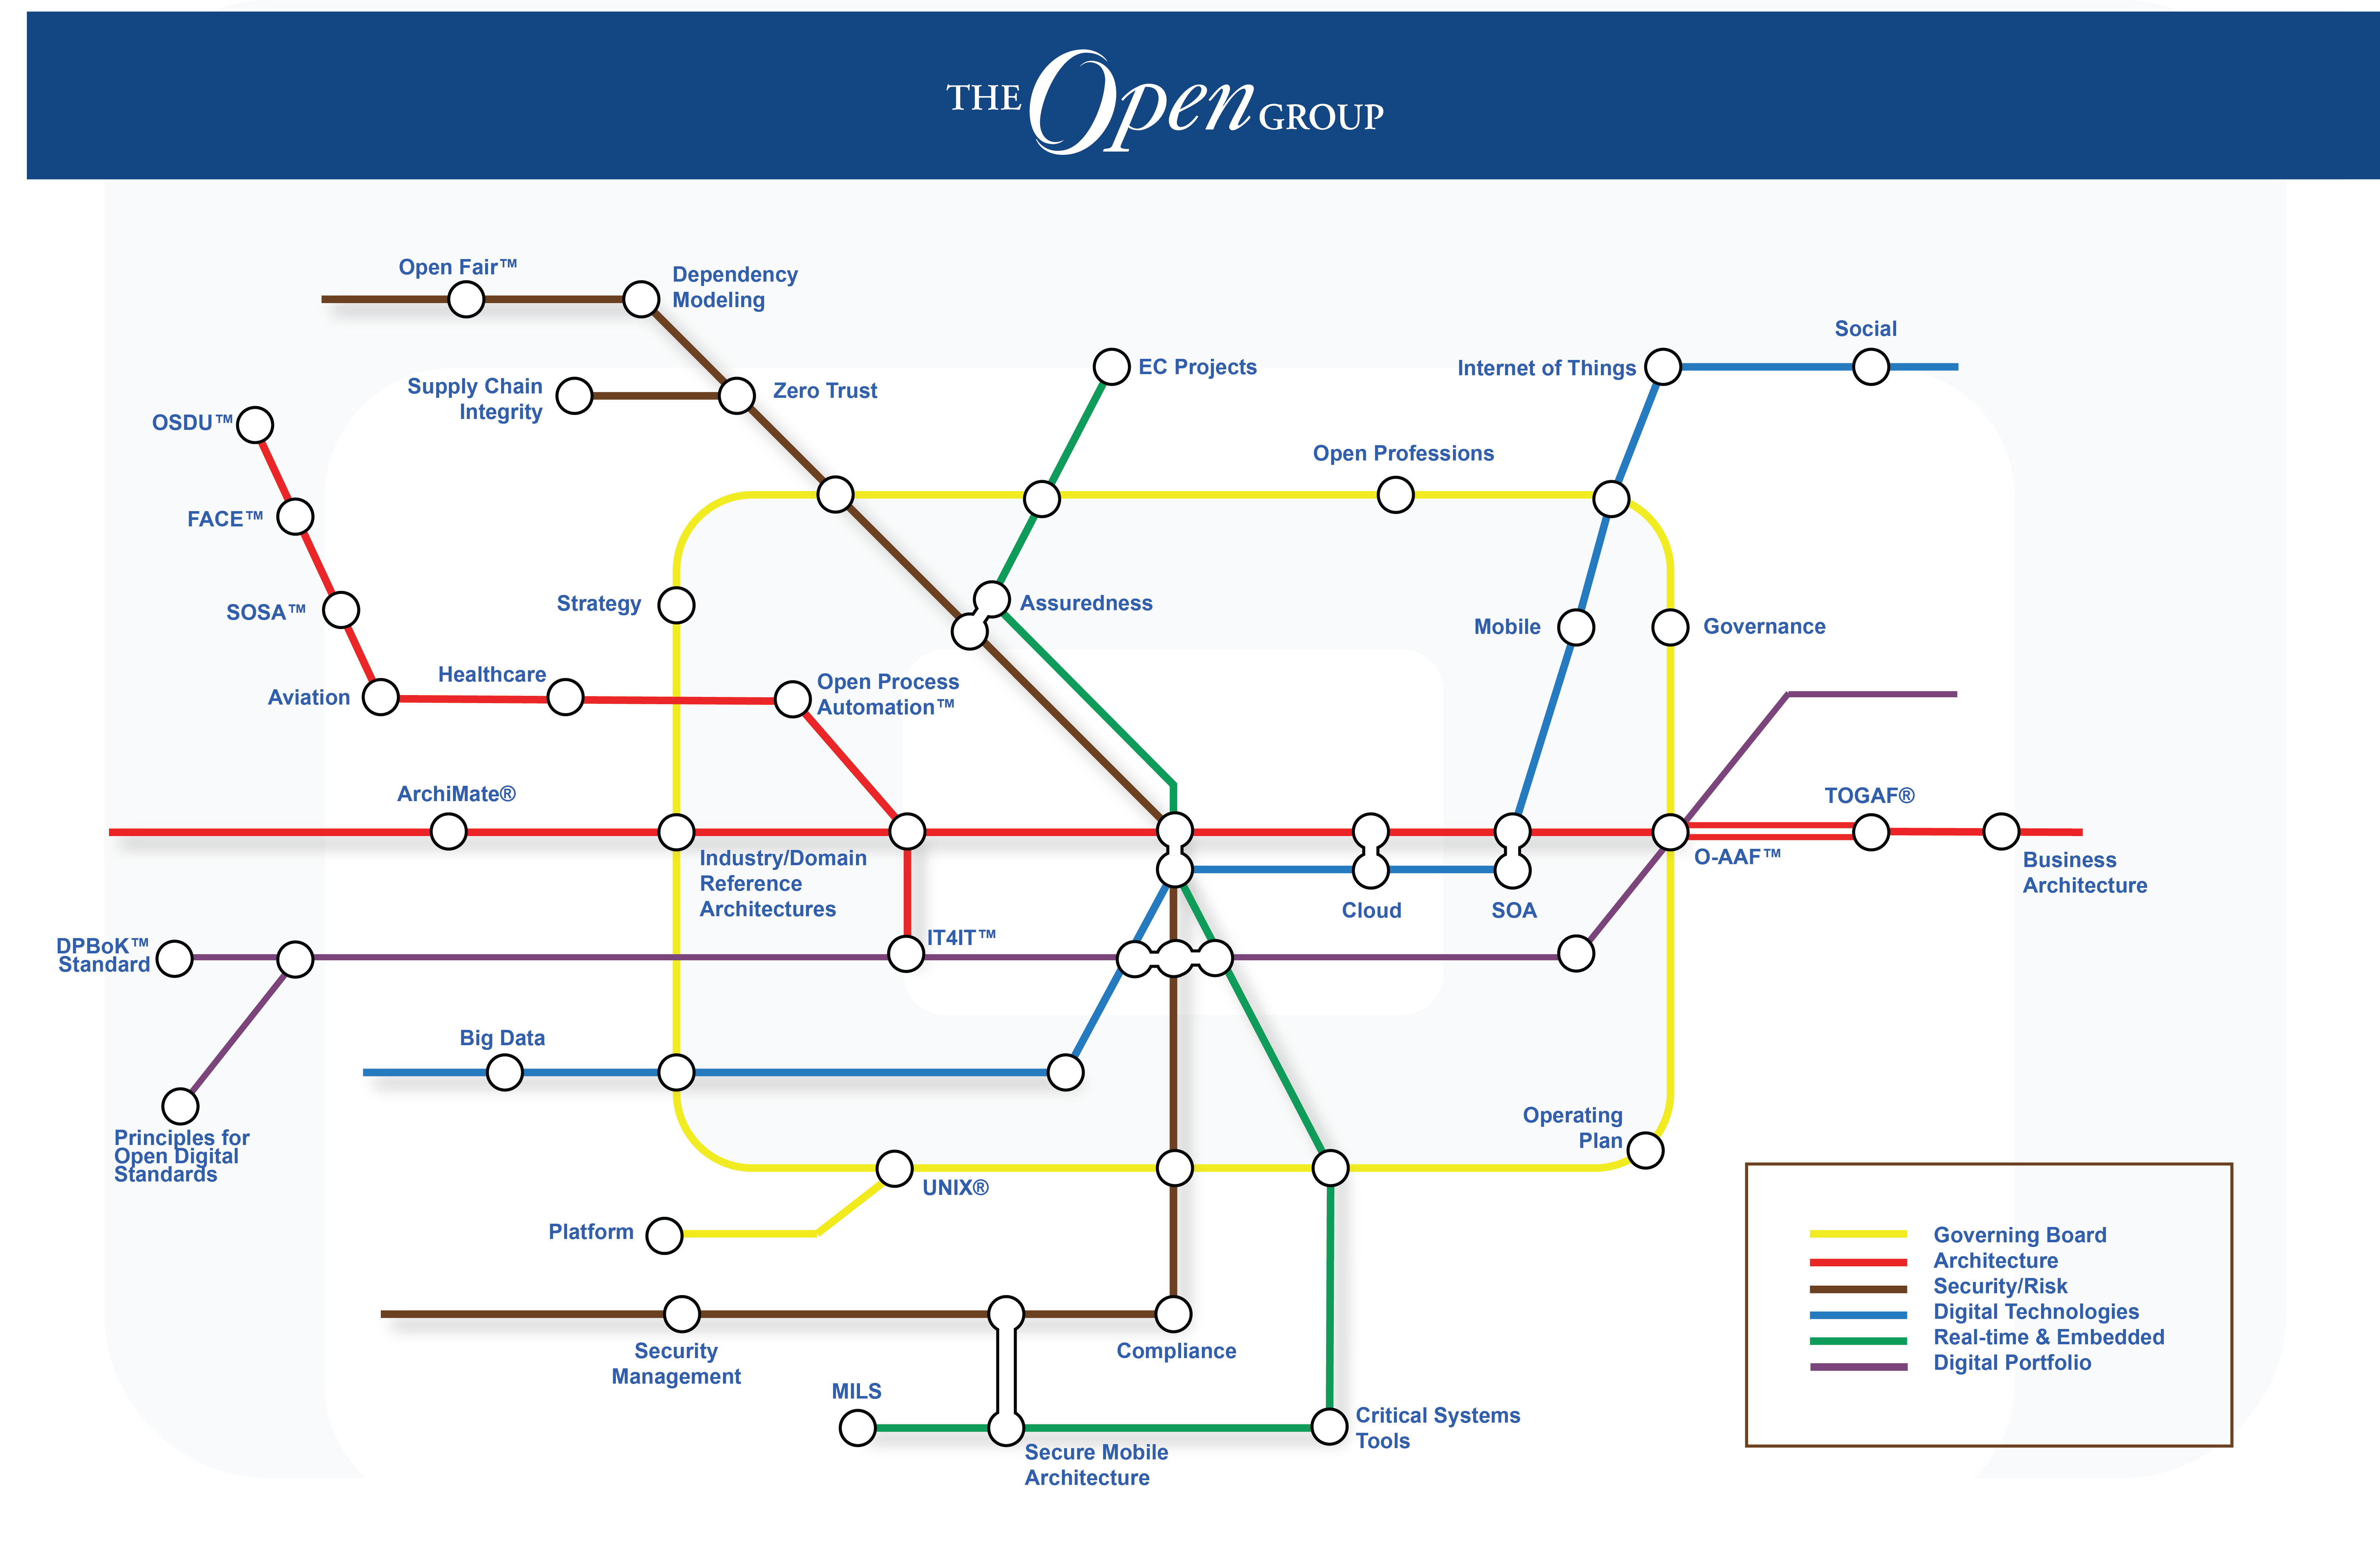 The Open Group Tube map